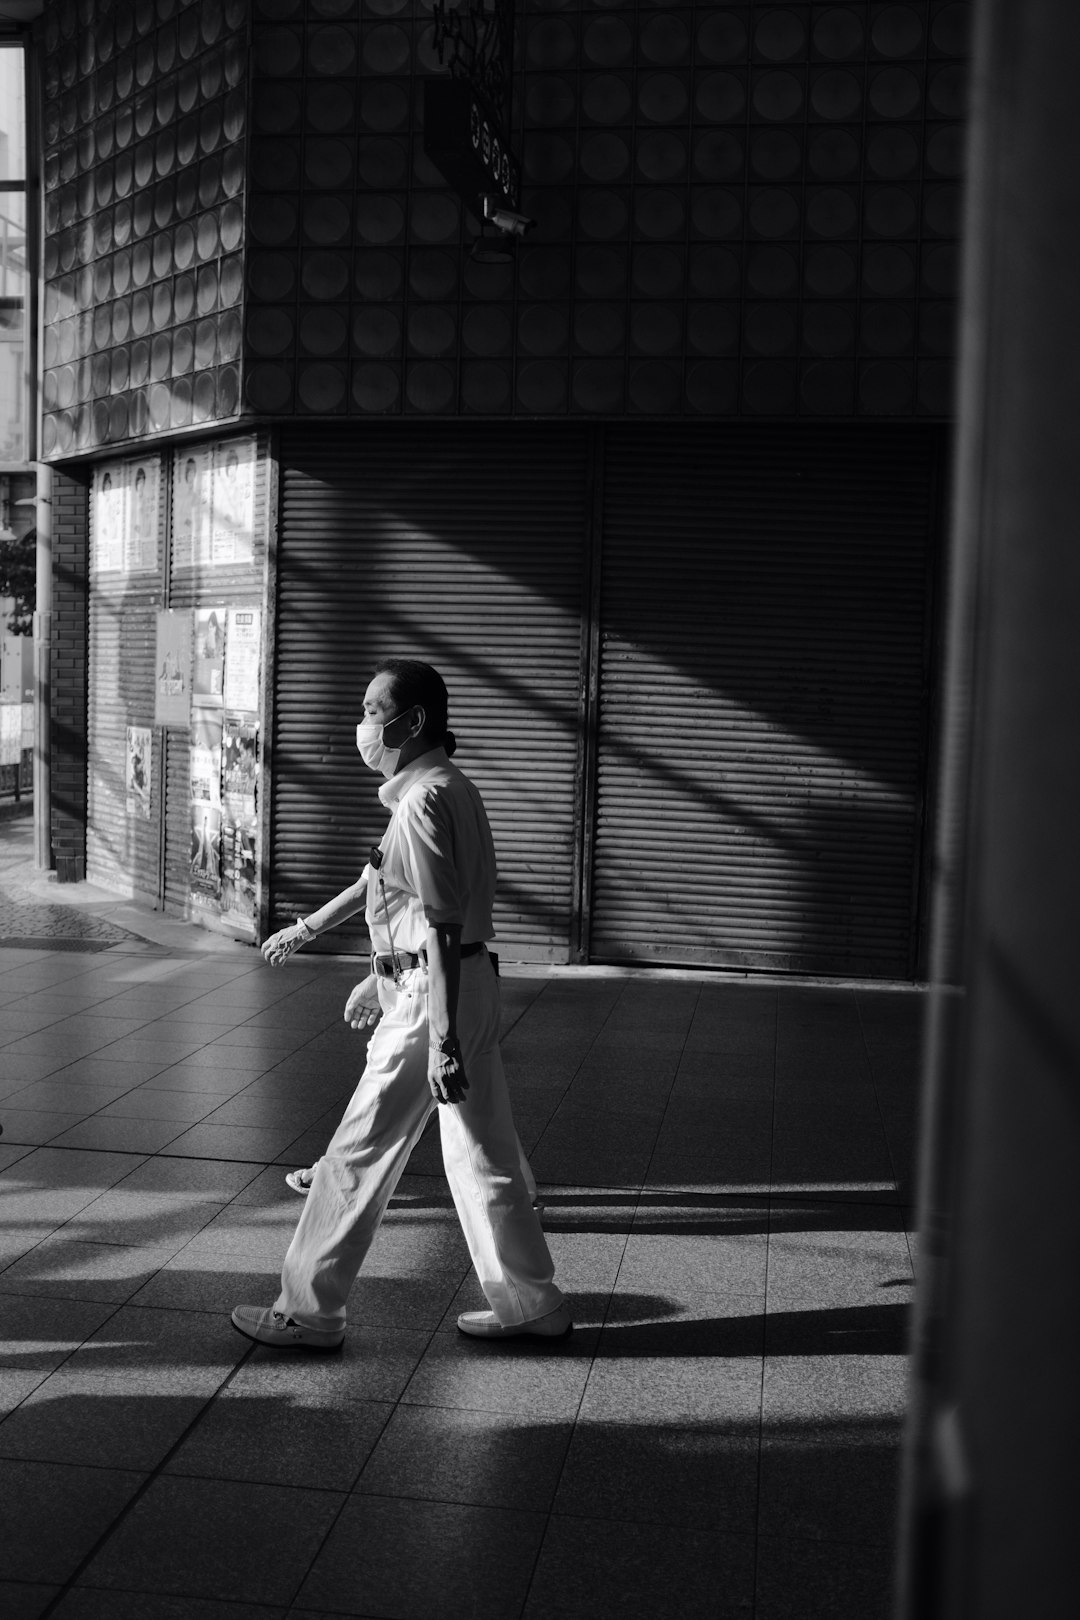 grayscale photo of man in white jacket and pants walking on sidewalk